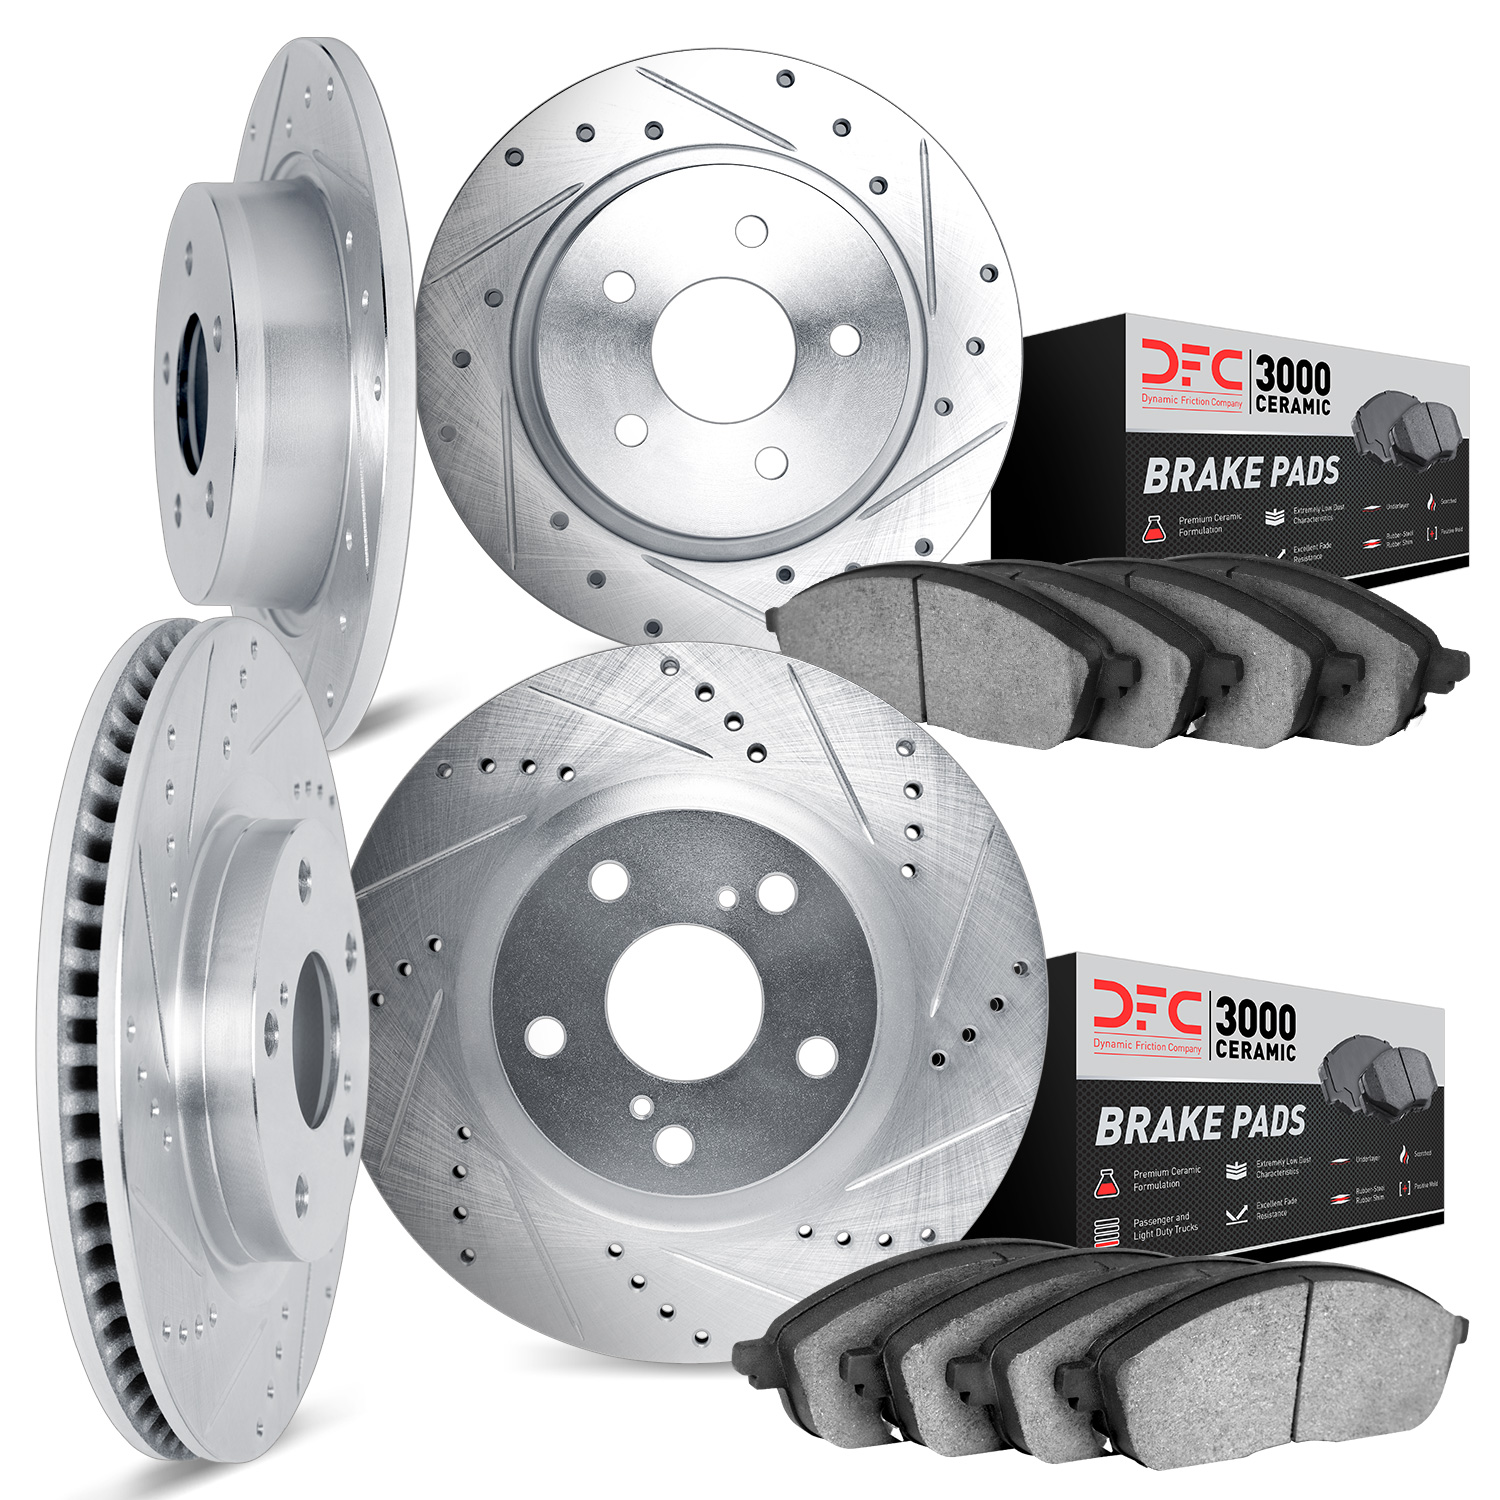 7304-40012 Drilled/Slotted Brake Rotor with 3000-Series Ceramic Brake Pads Kit [Silver], 1997-2000 Mopar, Position: Front and Re